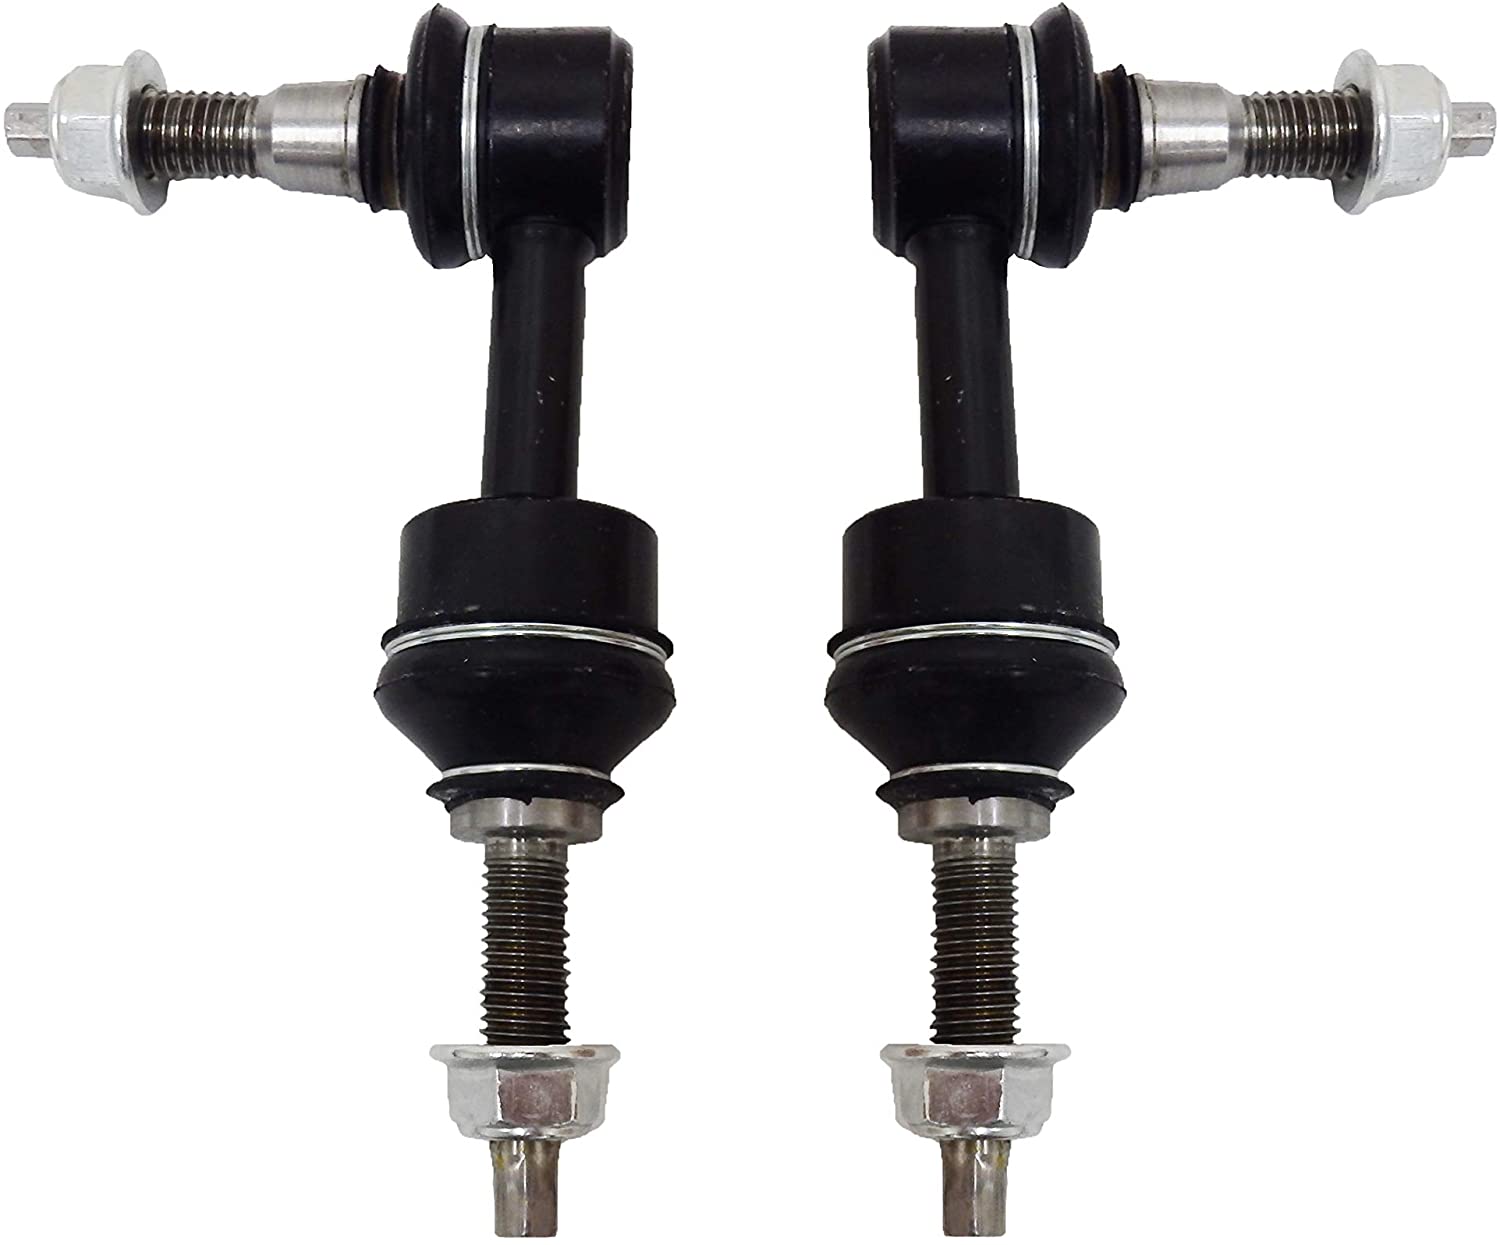 Suspension Dudes (2) Front Sway Bar Links FITS 2004-2005 Ford F-150 2WD K80278